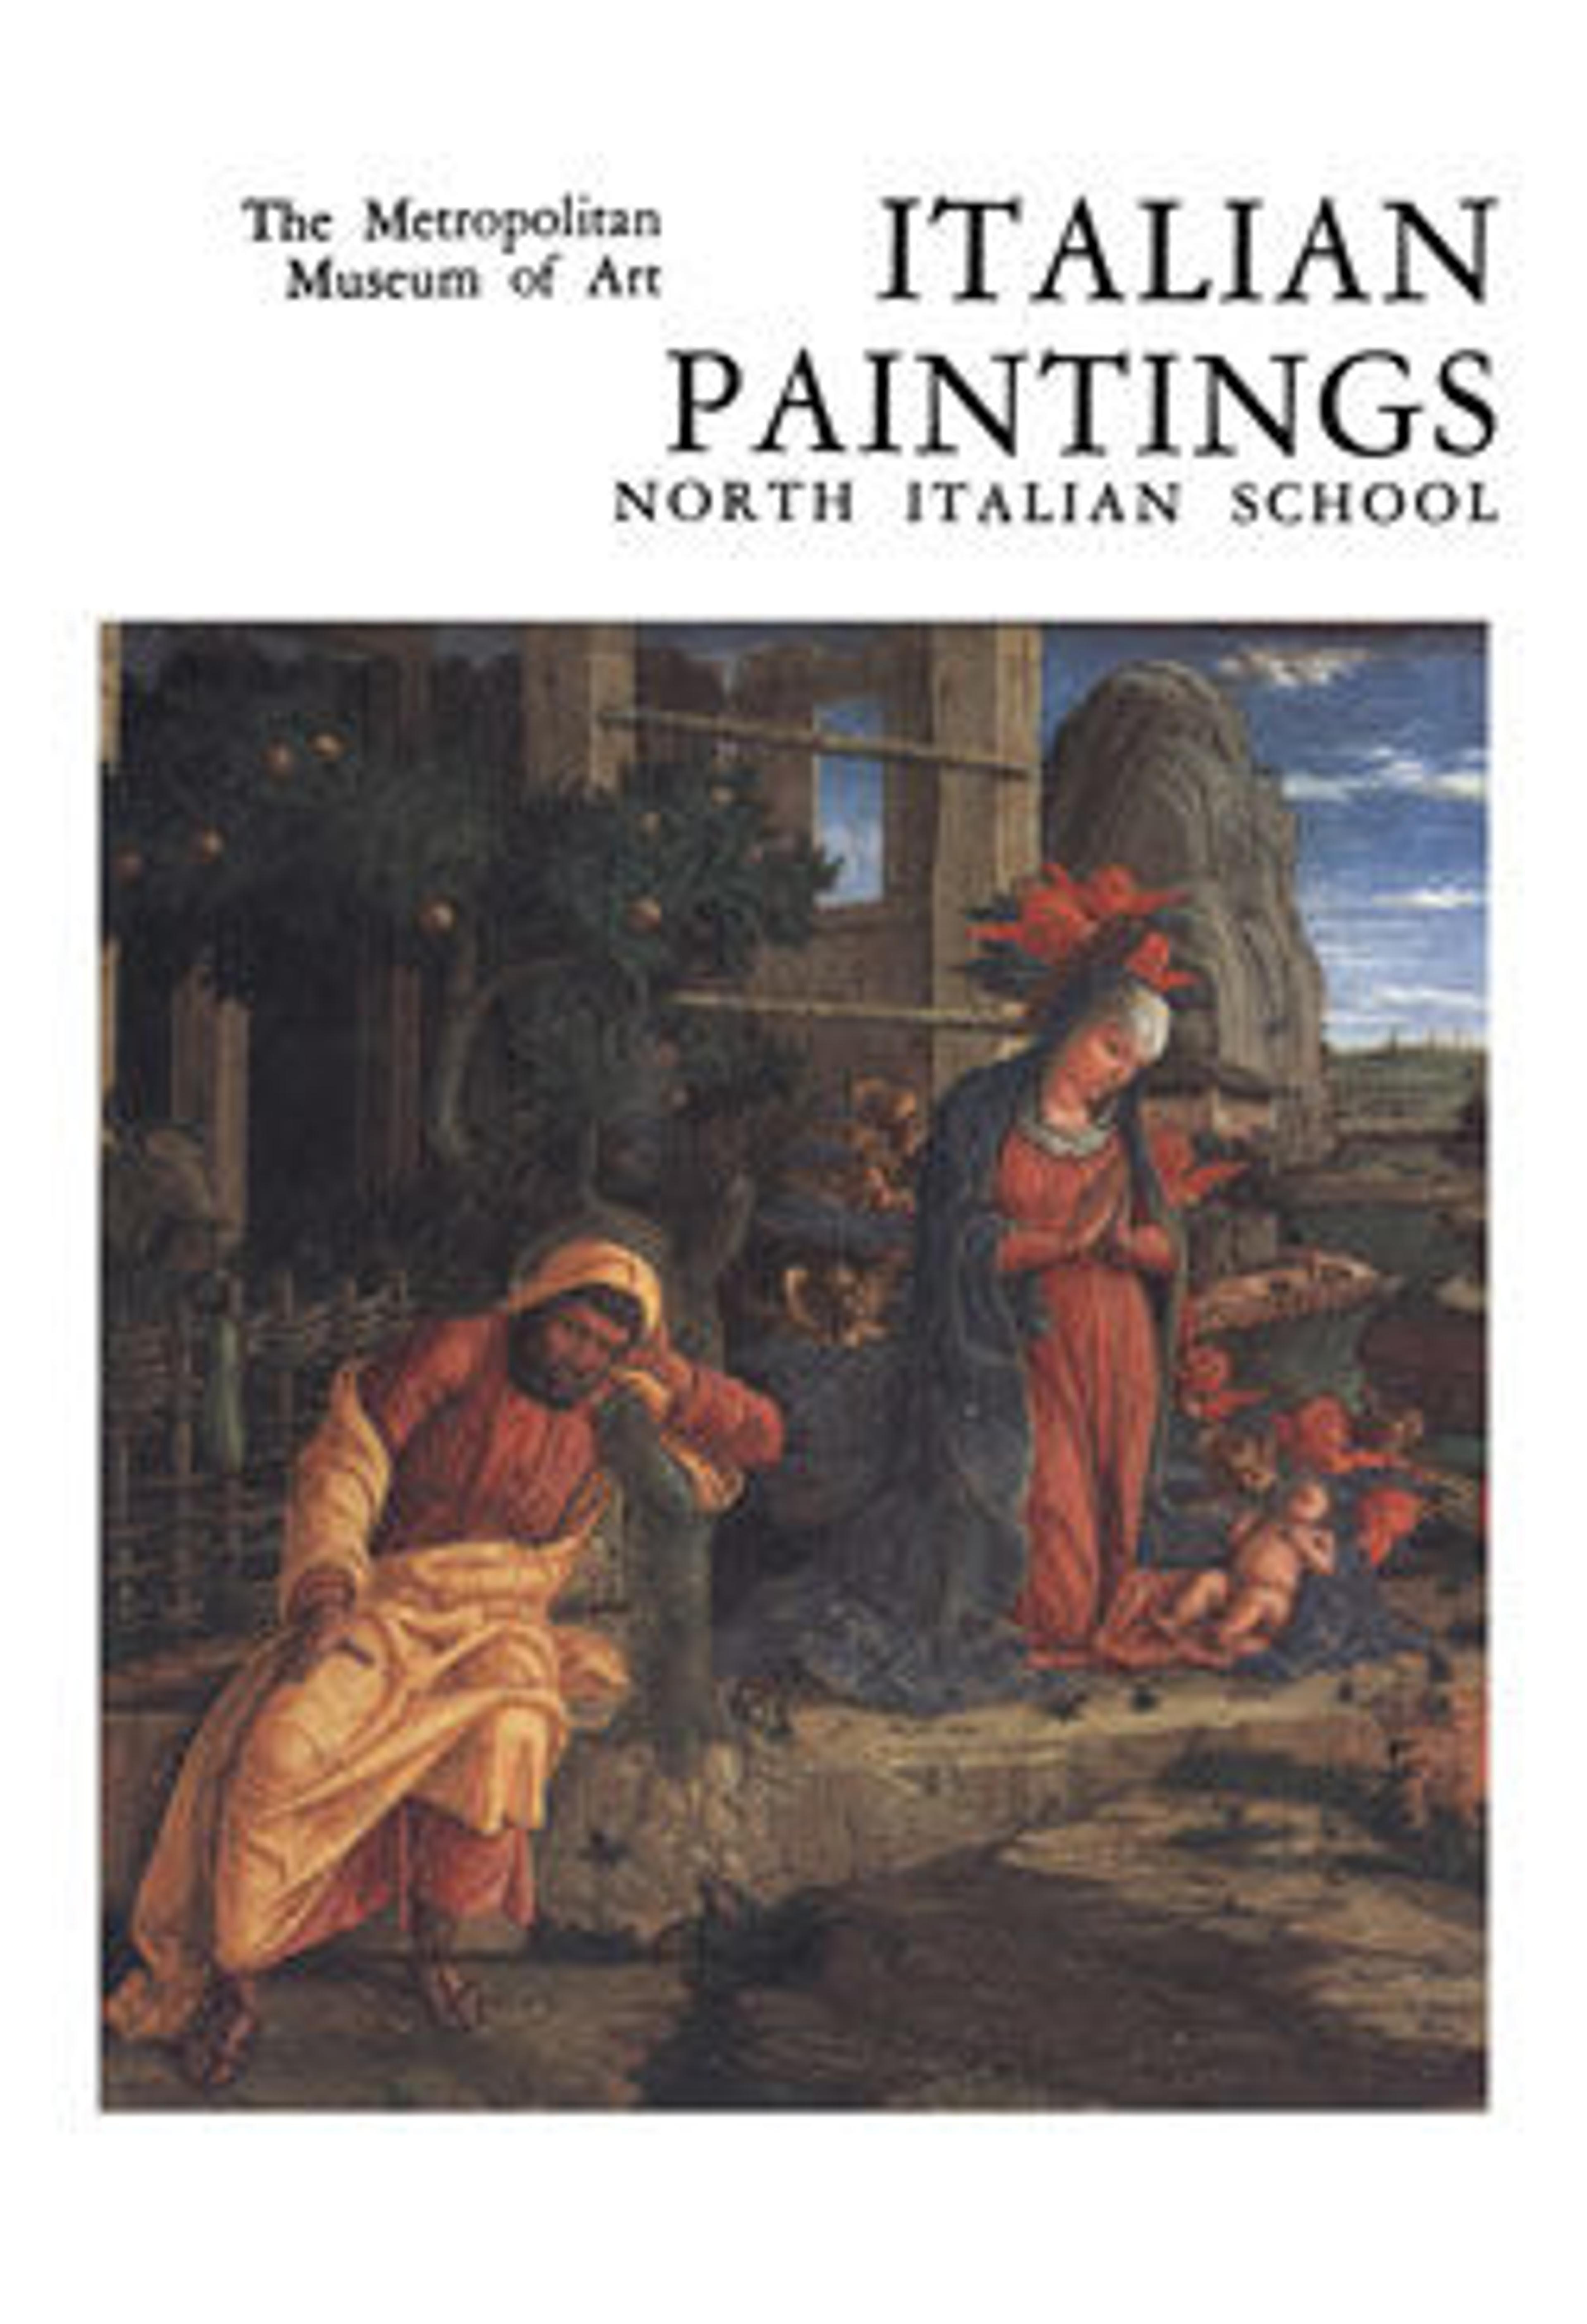 Italian Paintings: A Catalogue of the Collection of The Metropolitan Museum of Art. Vol. 4, North Italian School